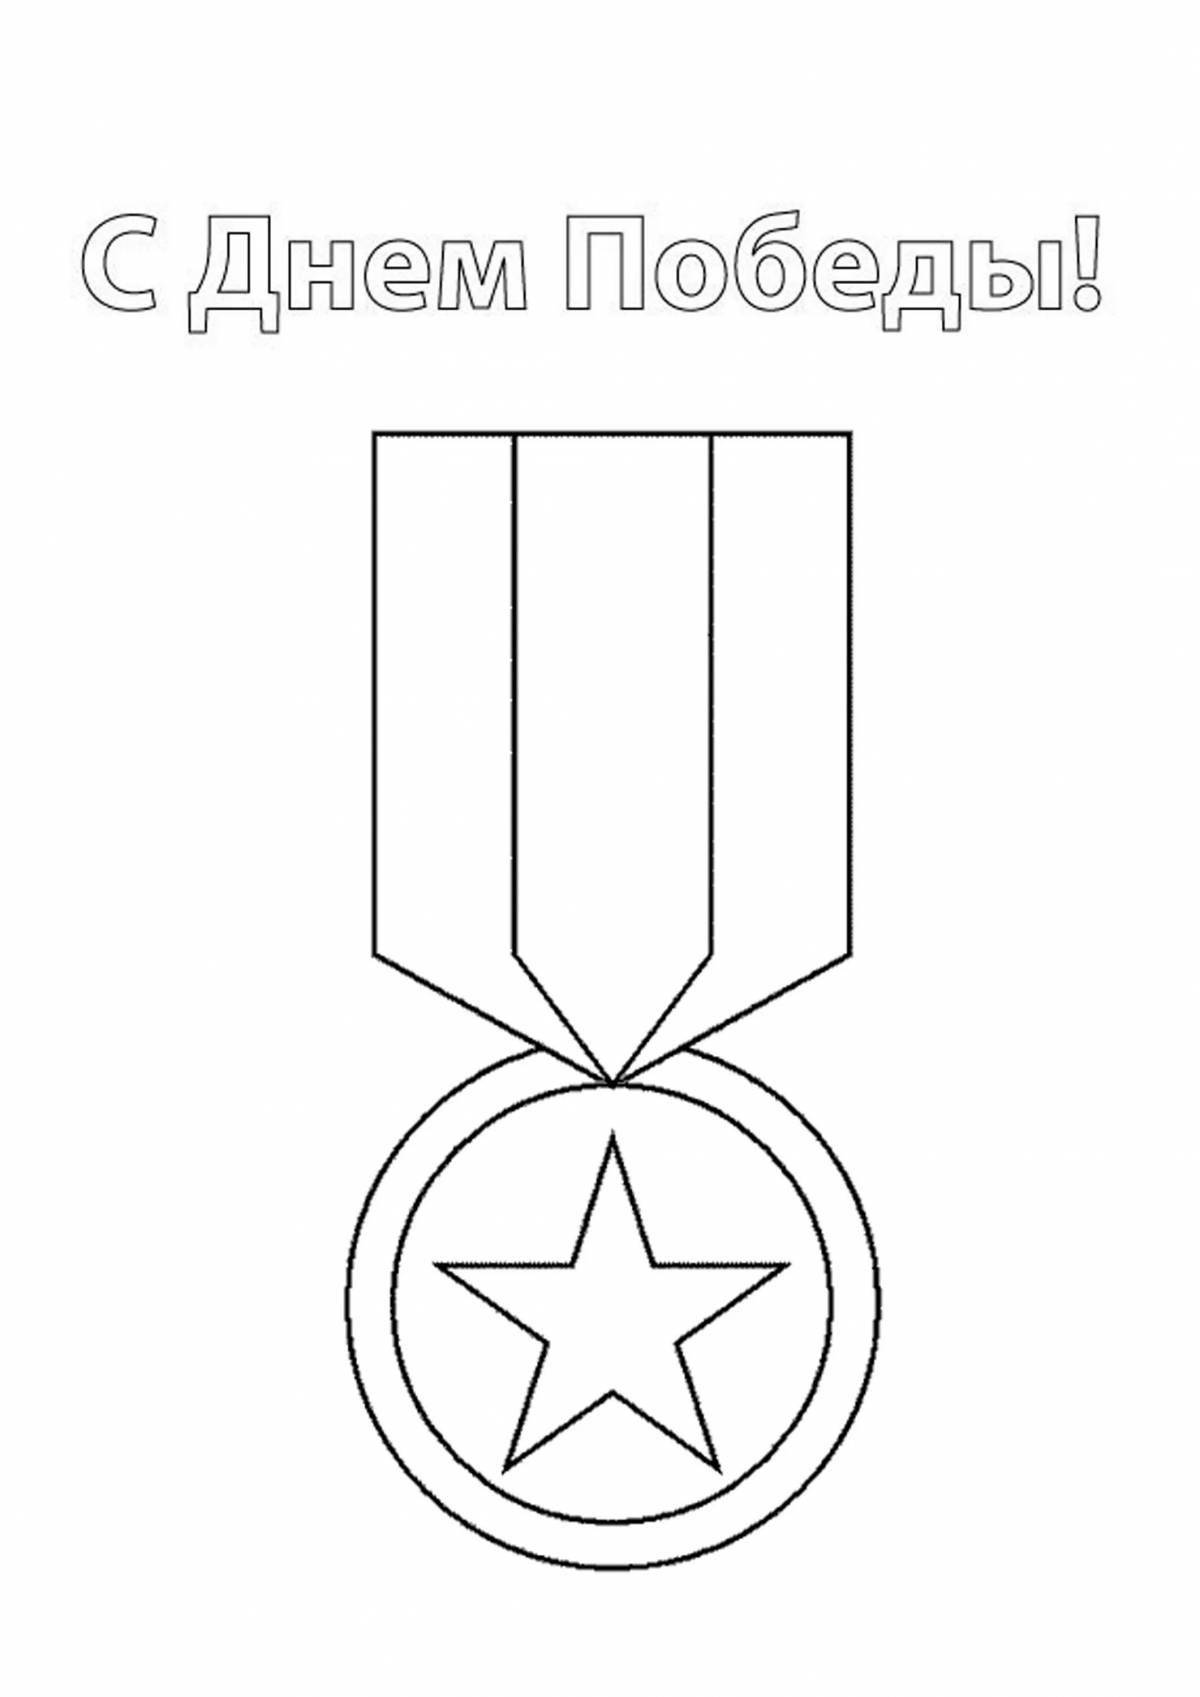 Brilliant medal of honor coloring book